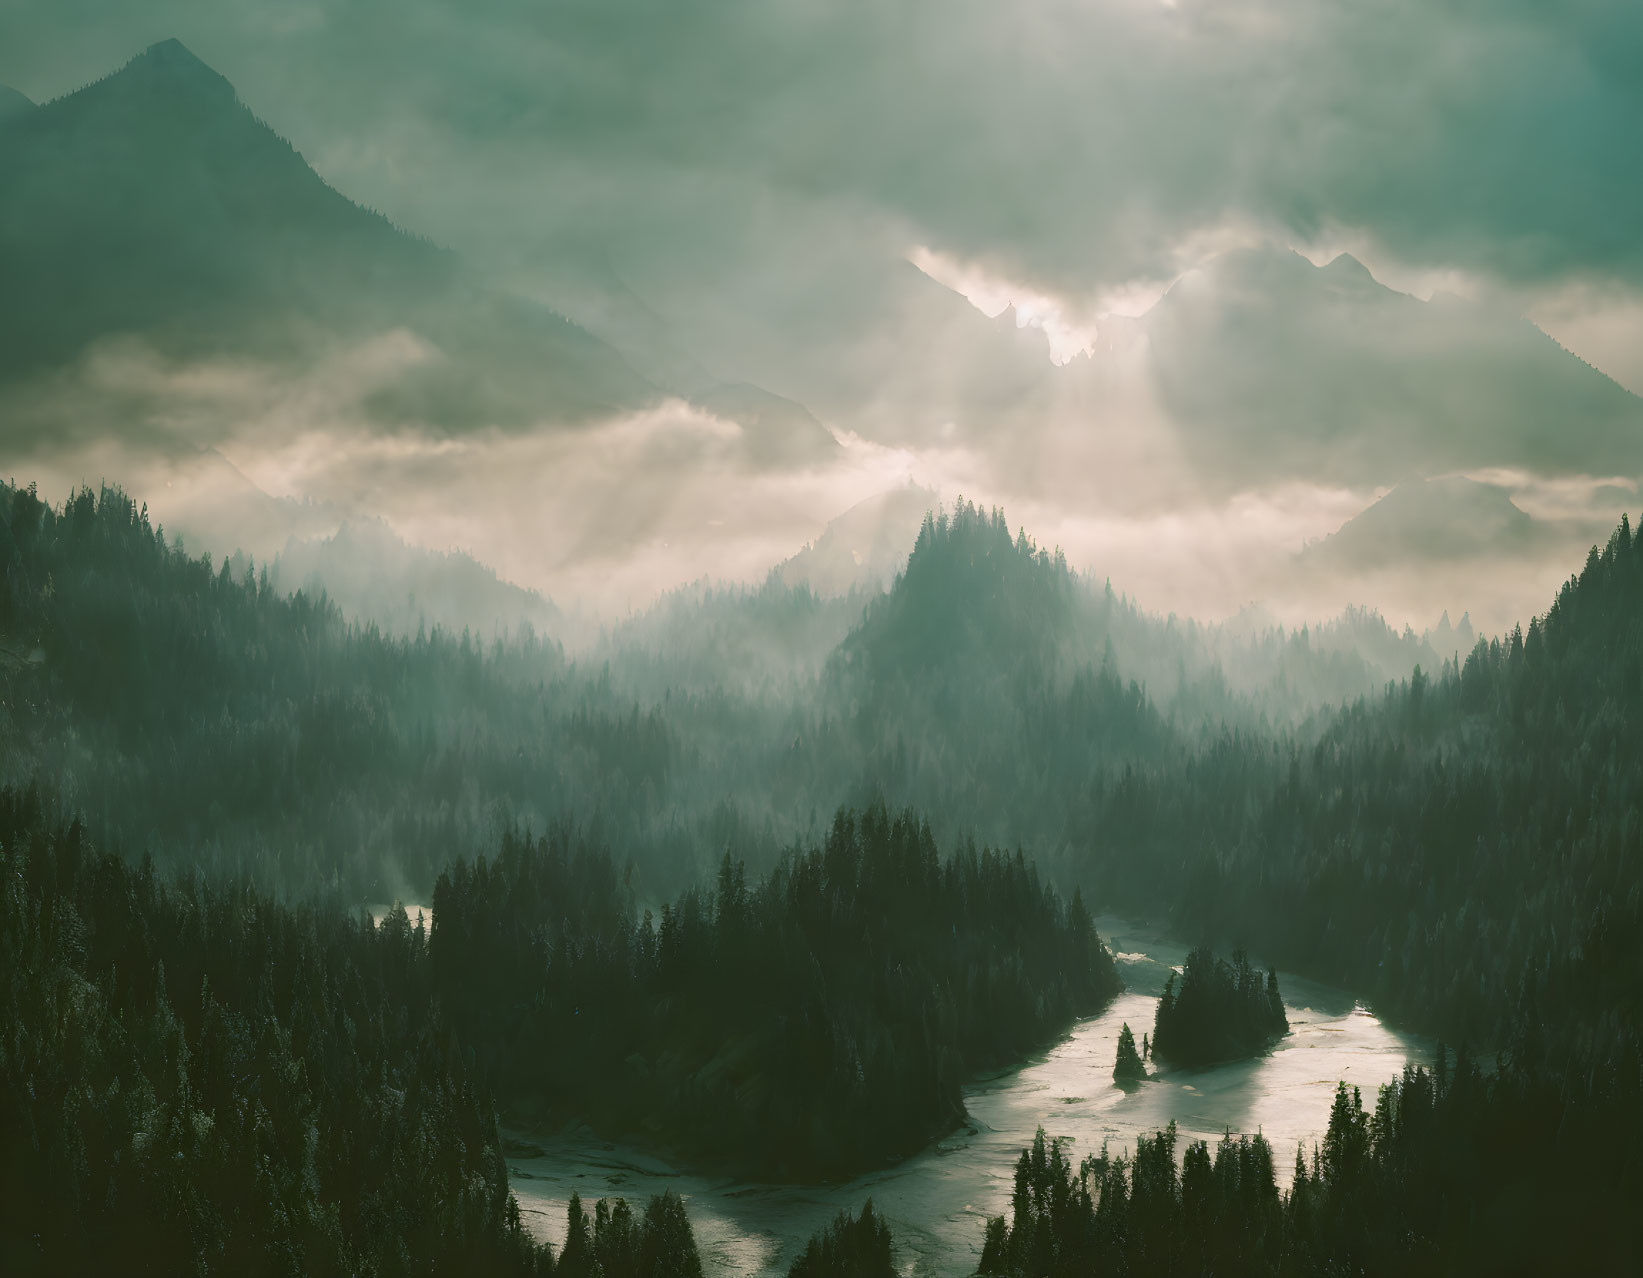 Mystical landscape with sunlight rays, forest mountains, and winding river